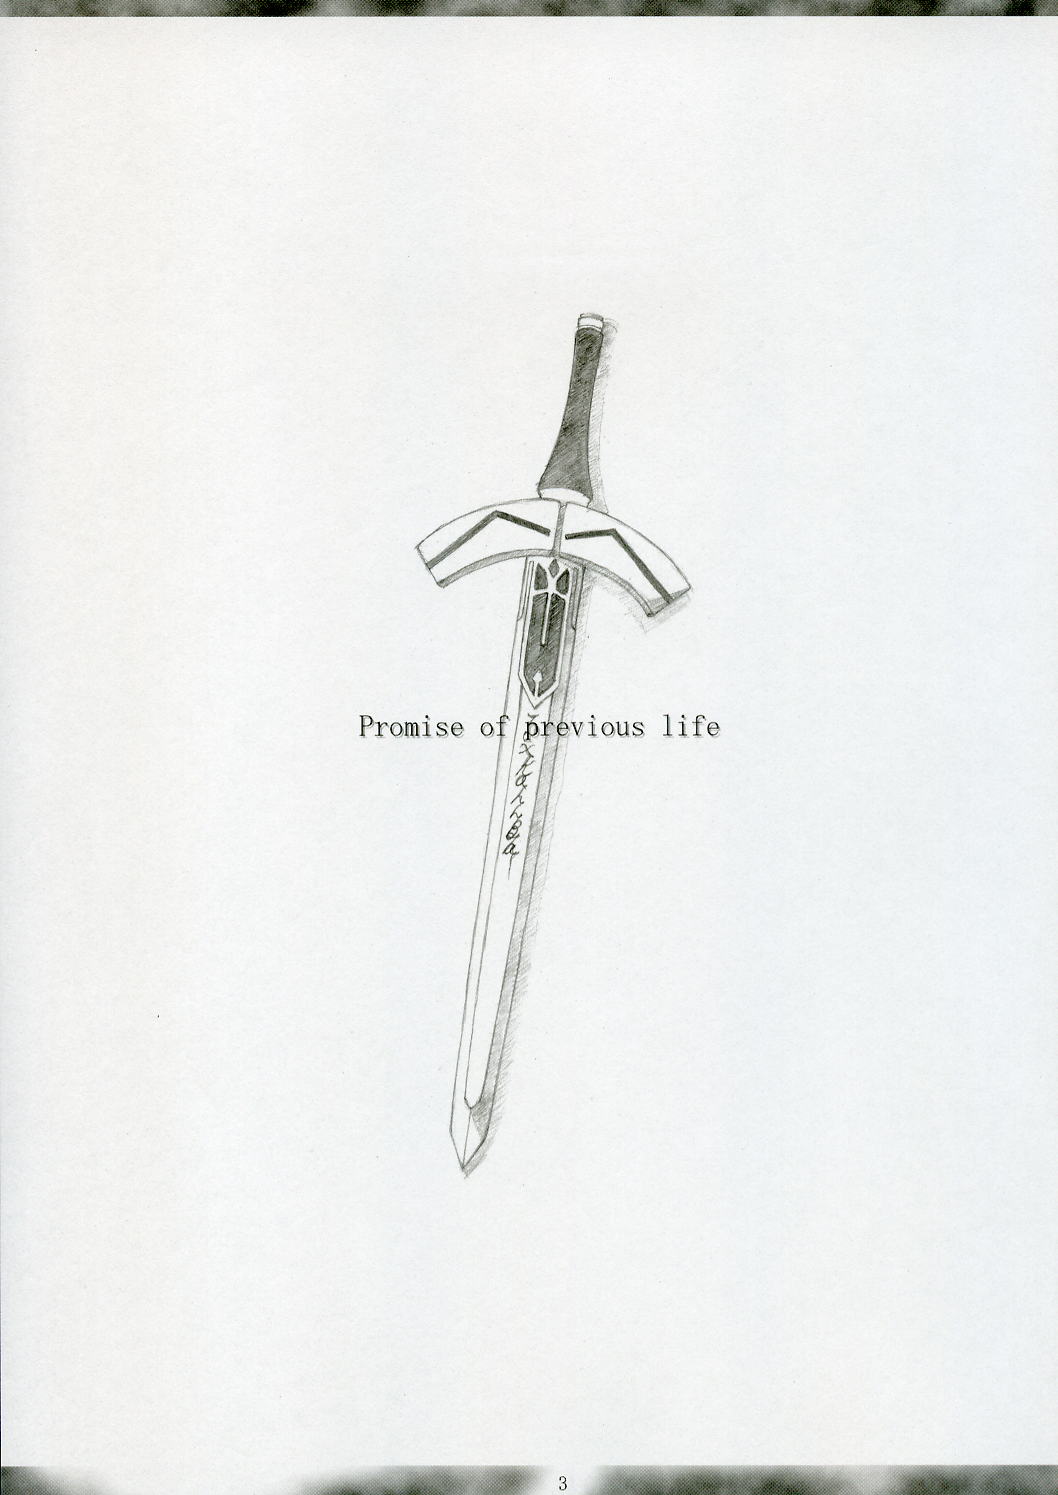 [Mugen no Chikara] Promise of previous life (Fate/stay night) [無限ノ力] Promise of previous life (Fate/stay night)